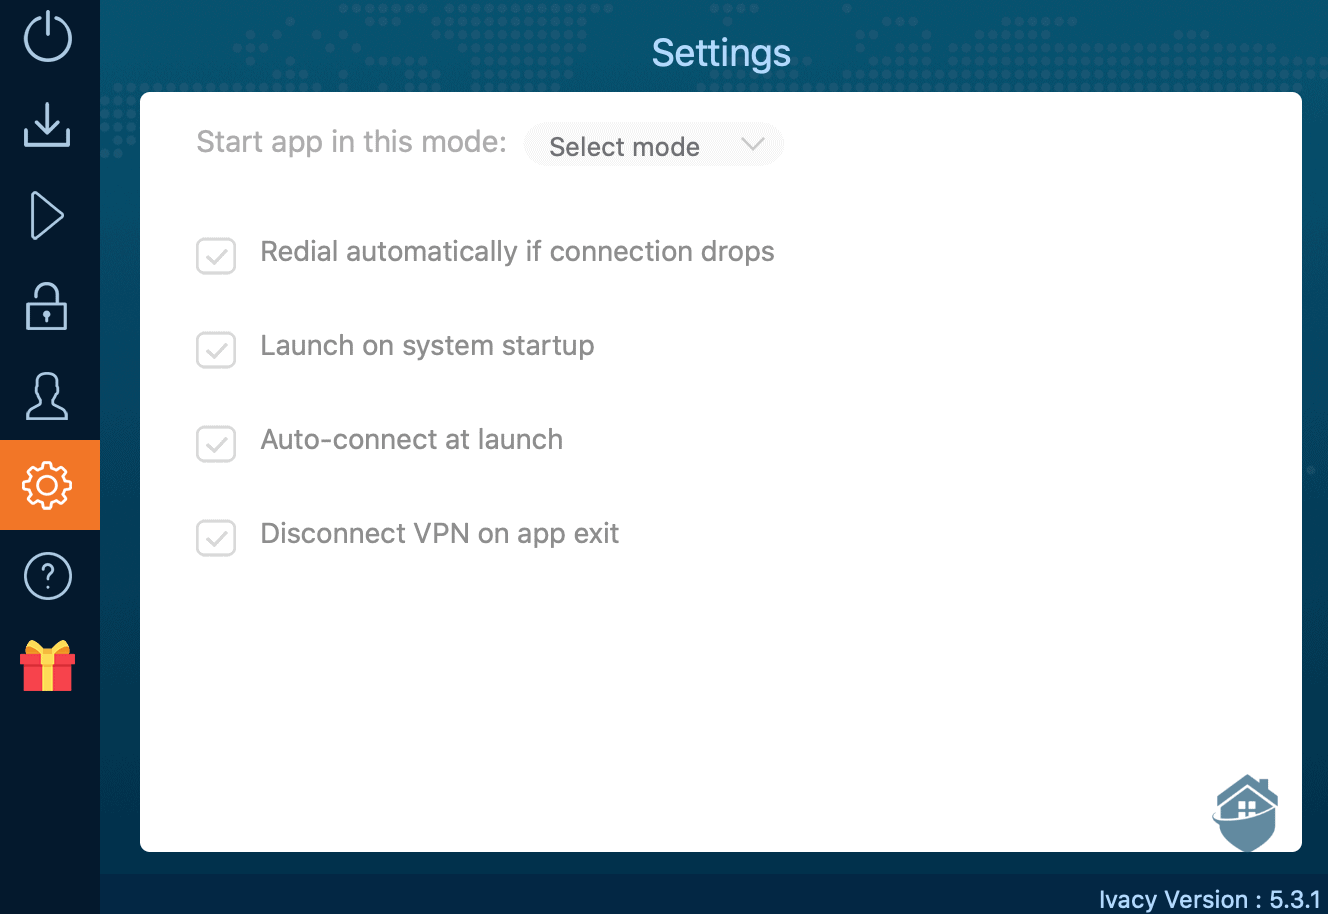 Ivacy Settings - A little lean on the customization, here.